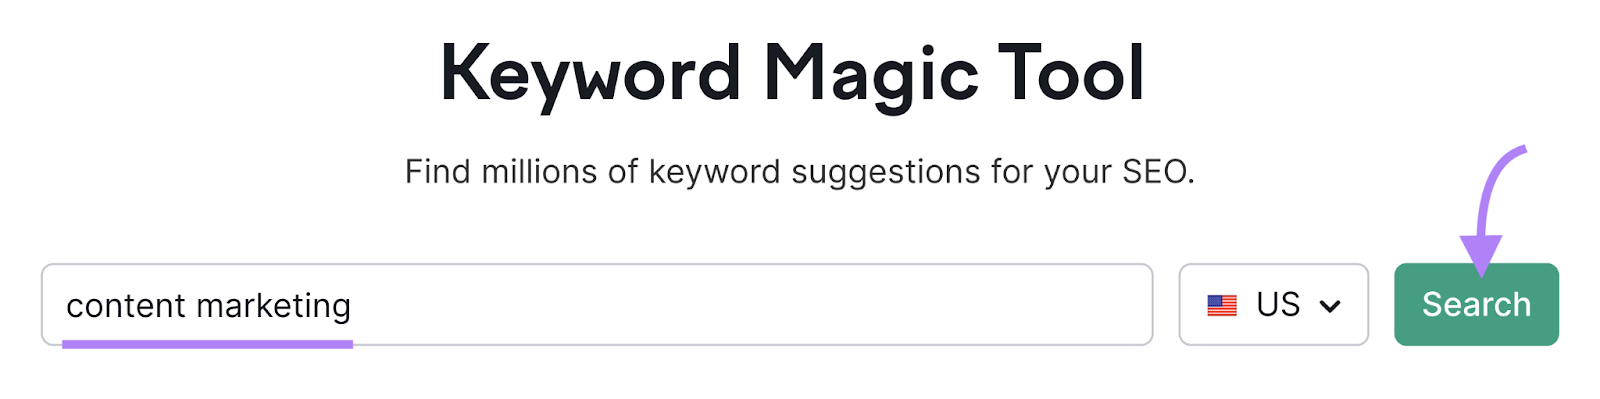 "content marketing" entered into Keyword Magic Tool search bar